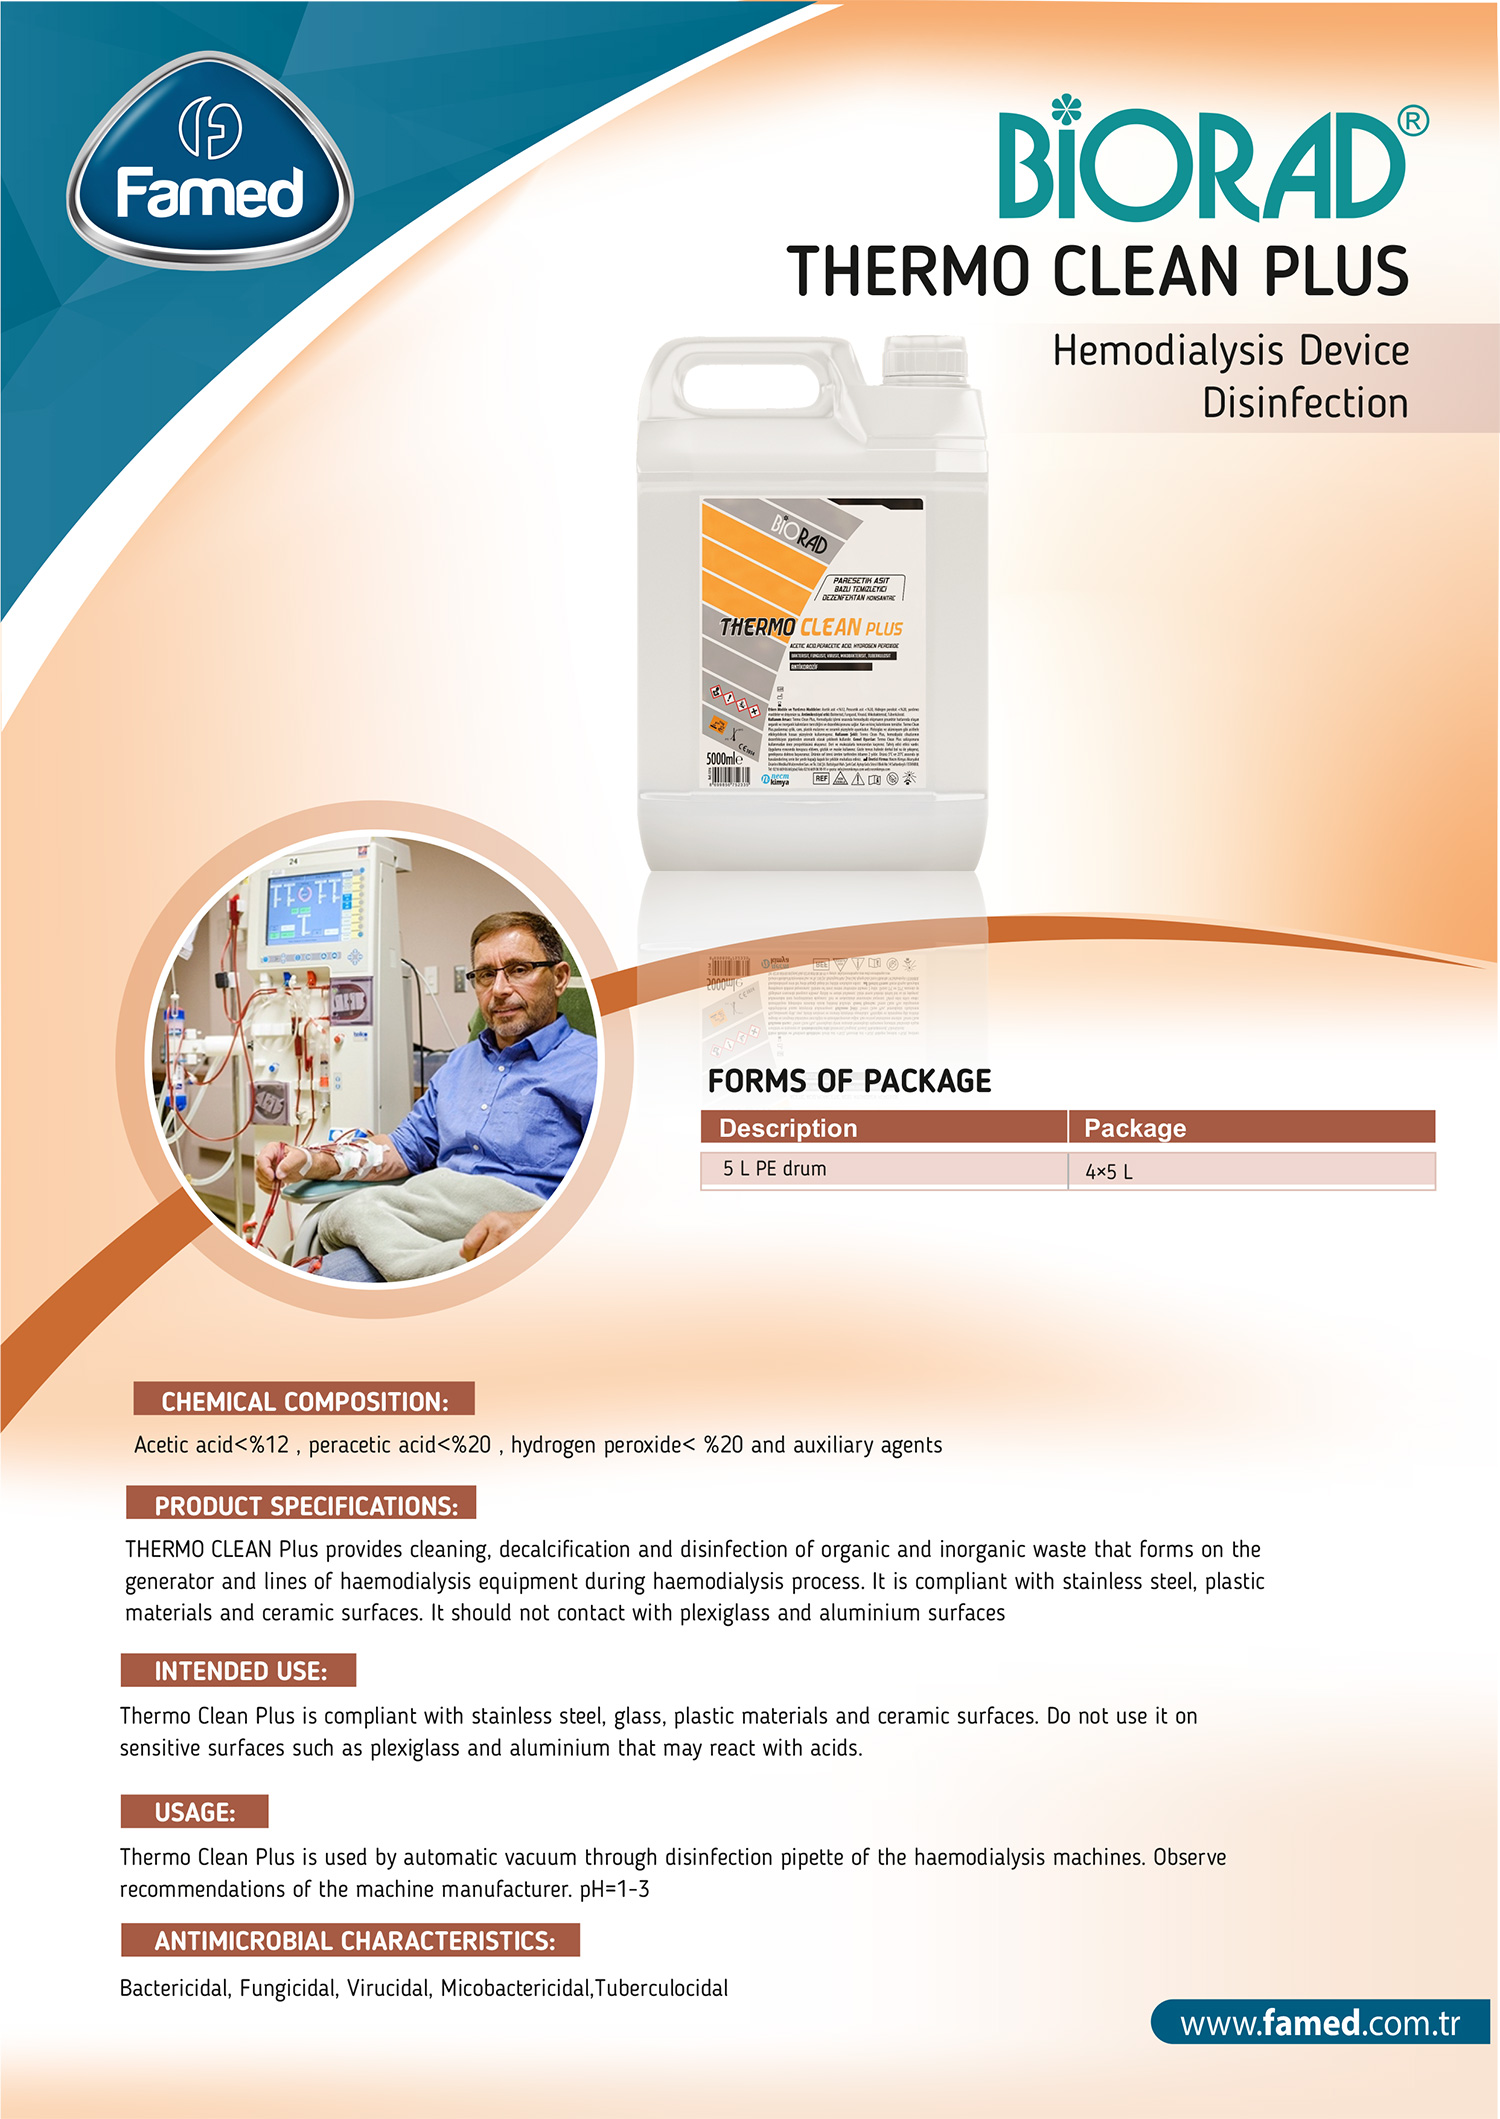 Thermo Clean Plus Hemodialysis Device Disinfection